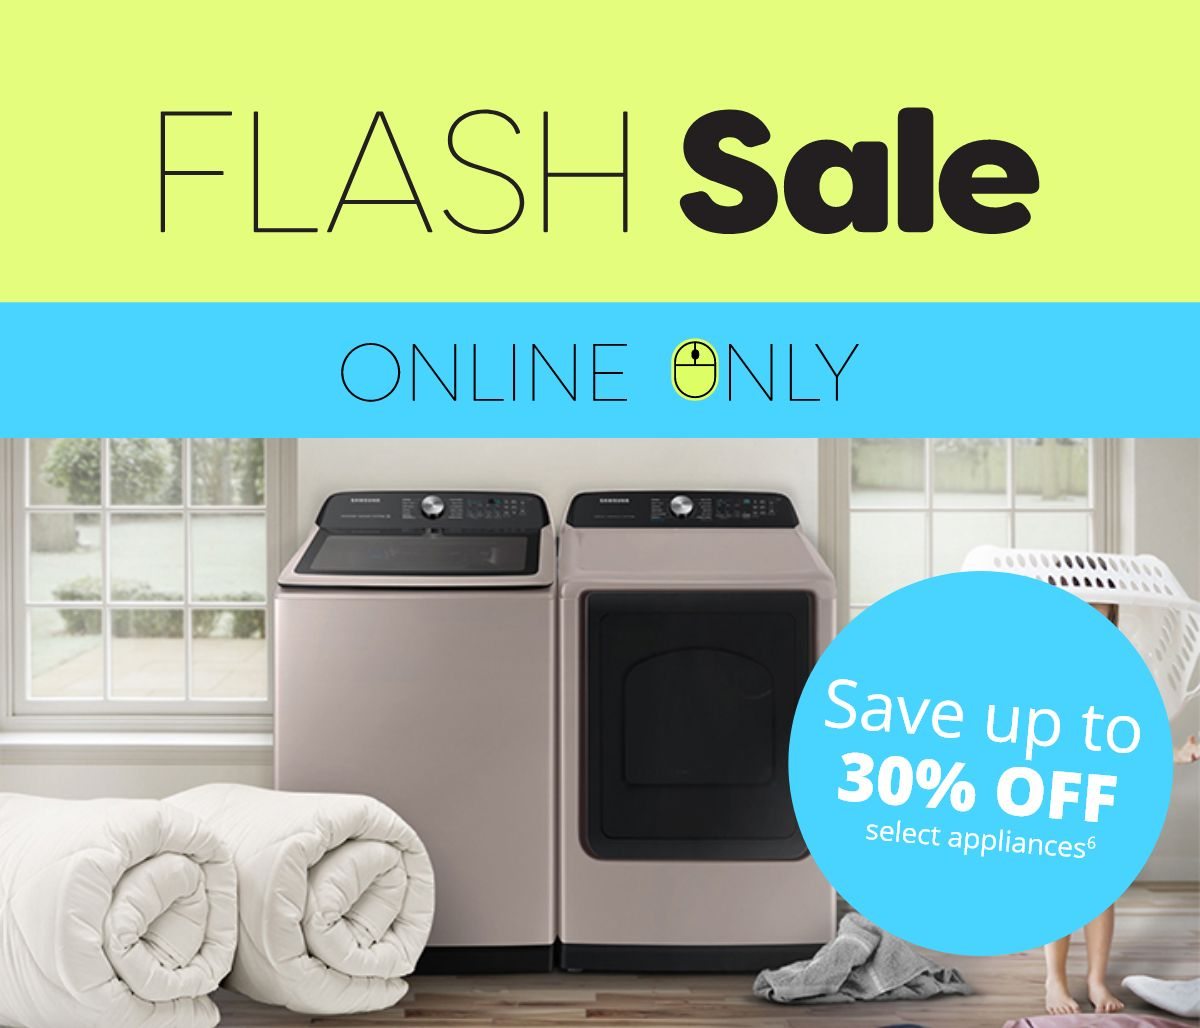 Save up to 30% on appliances